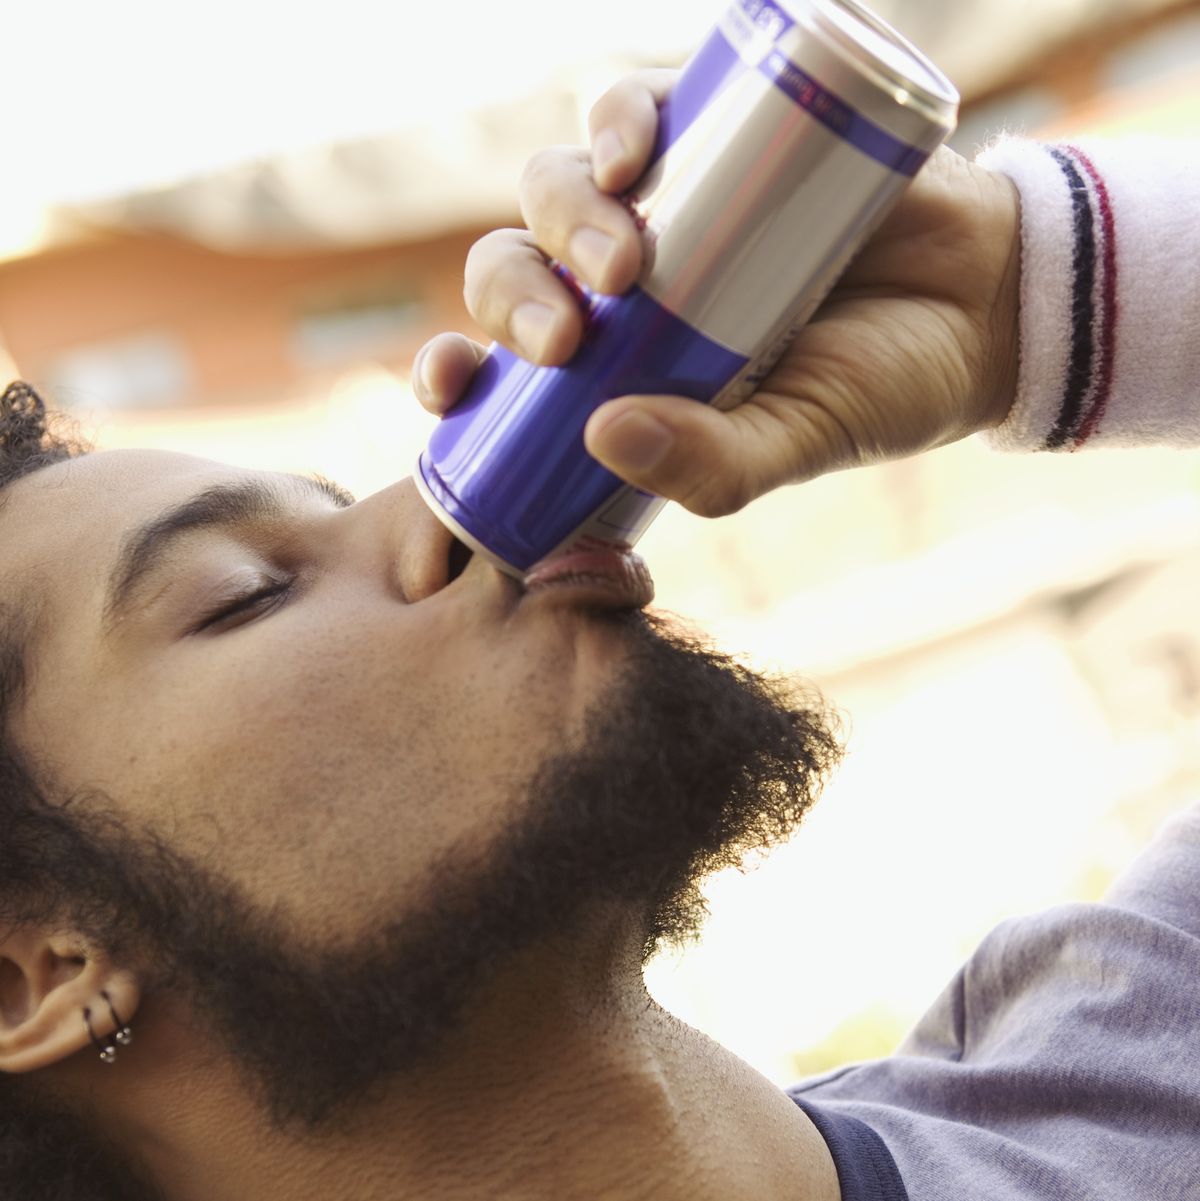 4 Reasons Why Energy Drinks Are Bad for Your Health